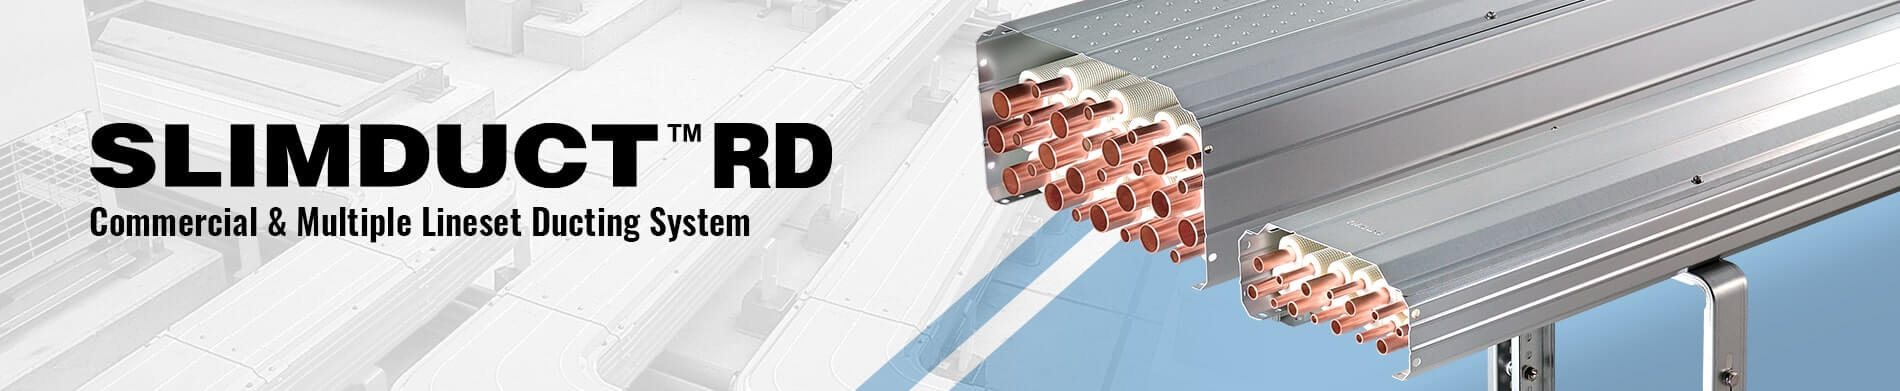 SLIMDUCT RD | Commercial & Multiple Lineset Ducting System